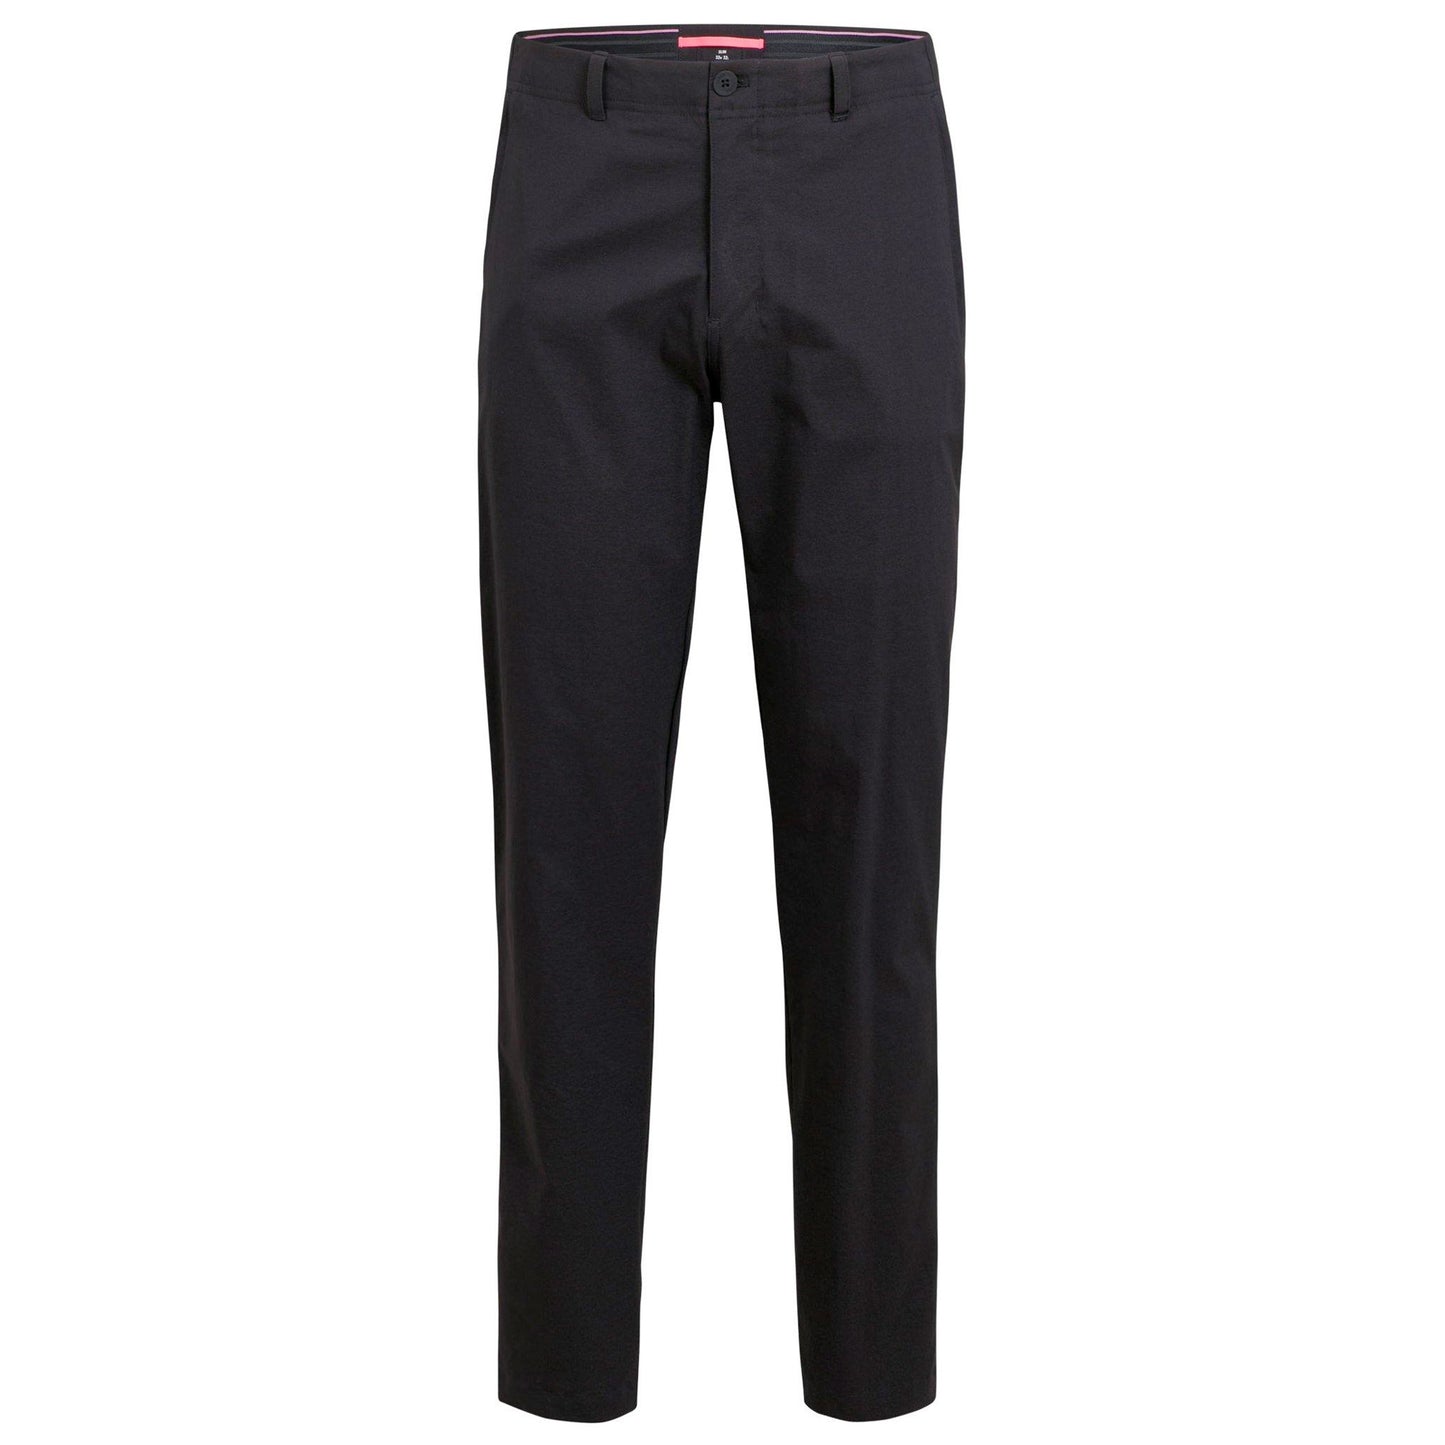 Rapha Mens Technical Trousers - Regular - Black, buy online at Woolys Wheels Sydney with free delivery